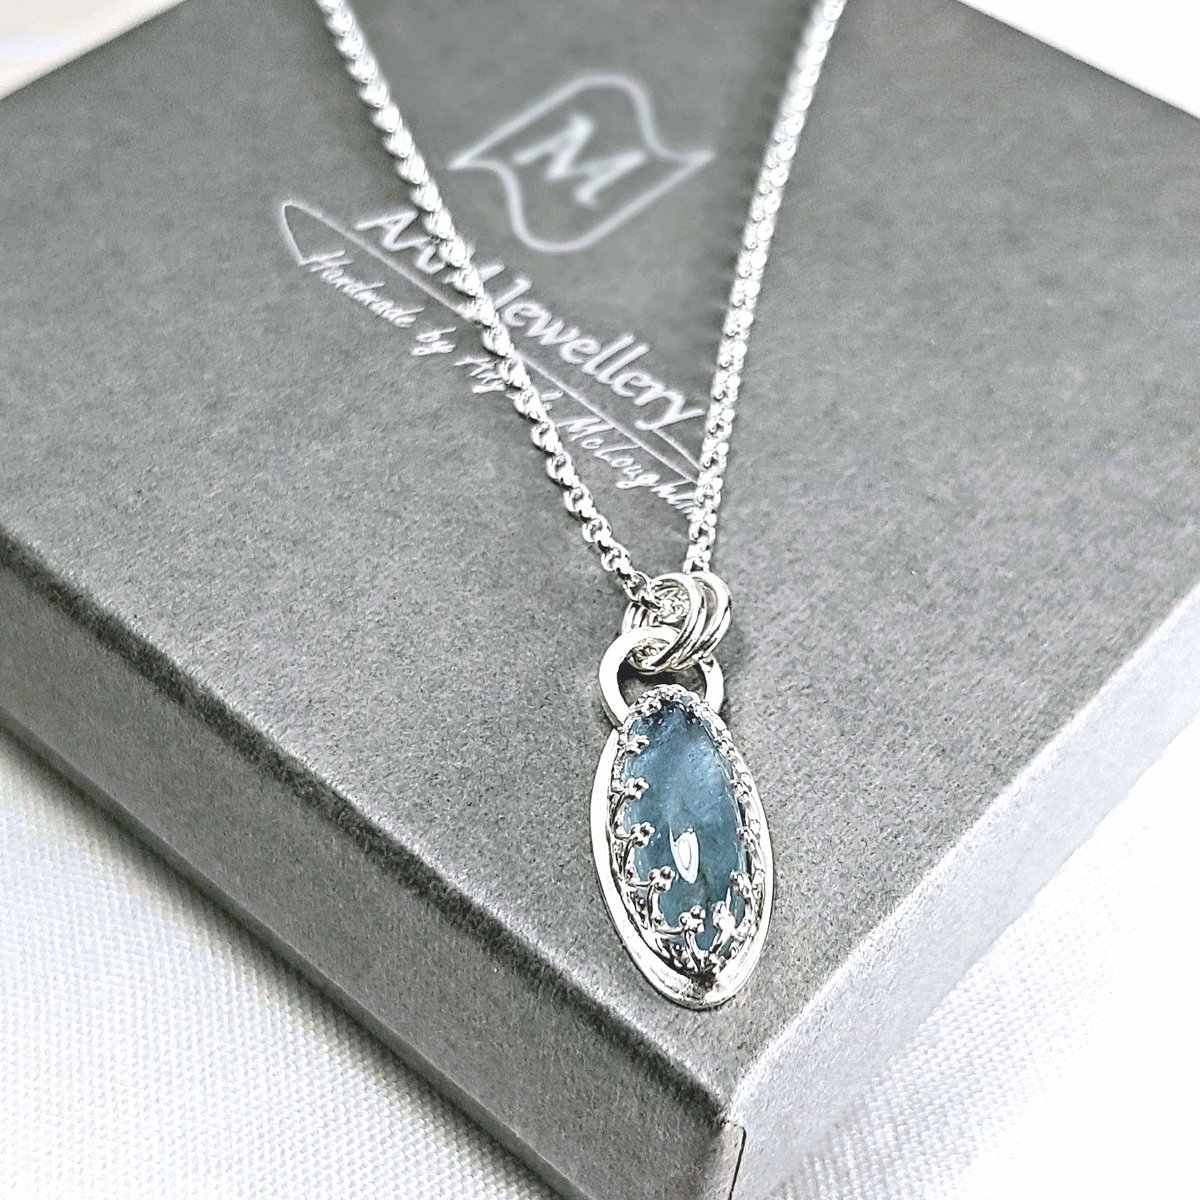 Image of Sterling Silver Aquamarine Pendant Necklace, Handmade Solid Silver Pendant with Genuine Aquamarine